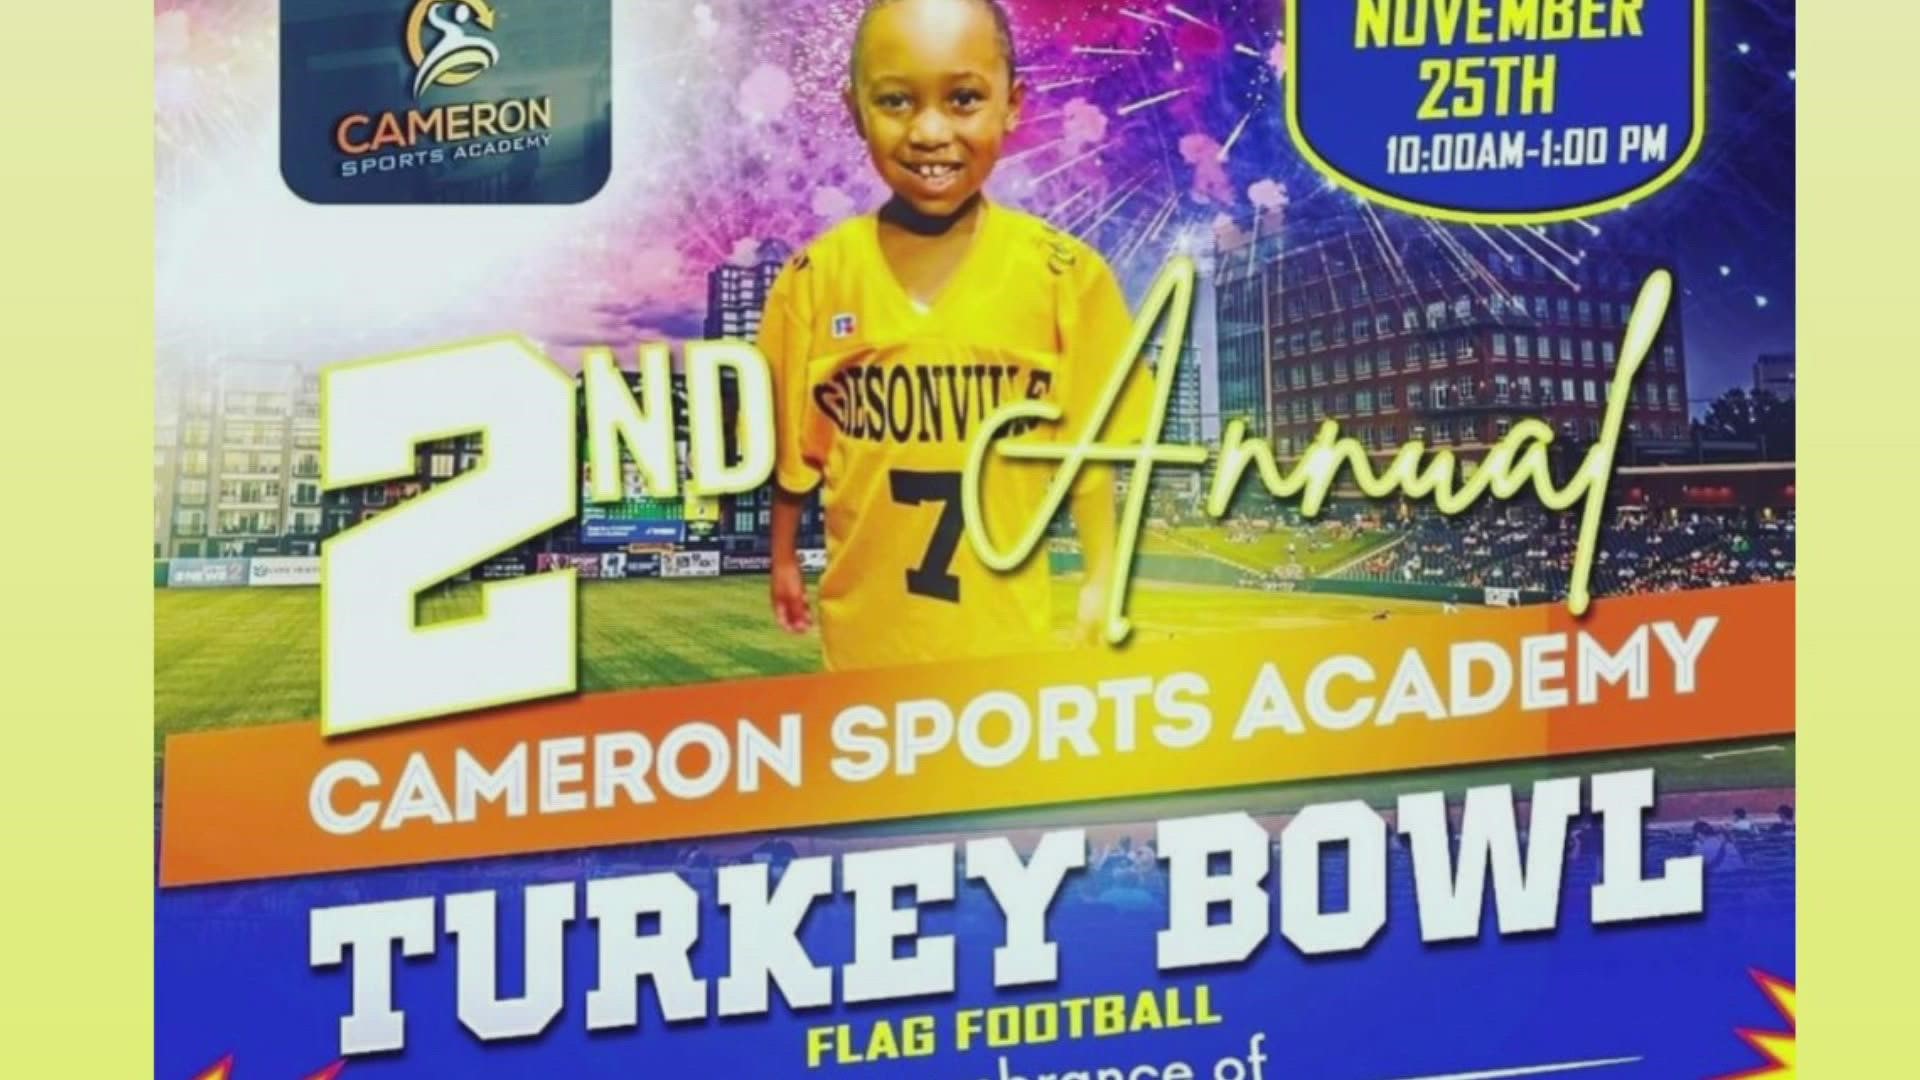 The Robertsons lost their only son Cameron in a tragic accident last year. Friday they'll hold the Cameron Sports Agency's Second Annual Turkey Bowl in his honor.